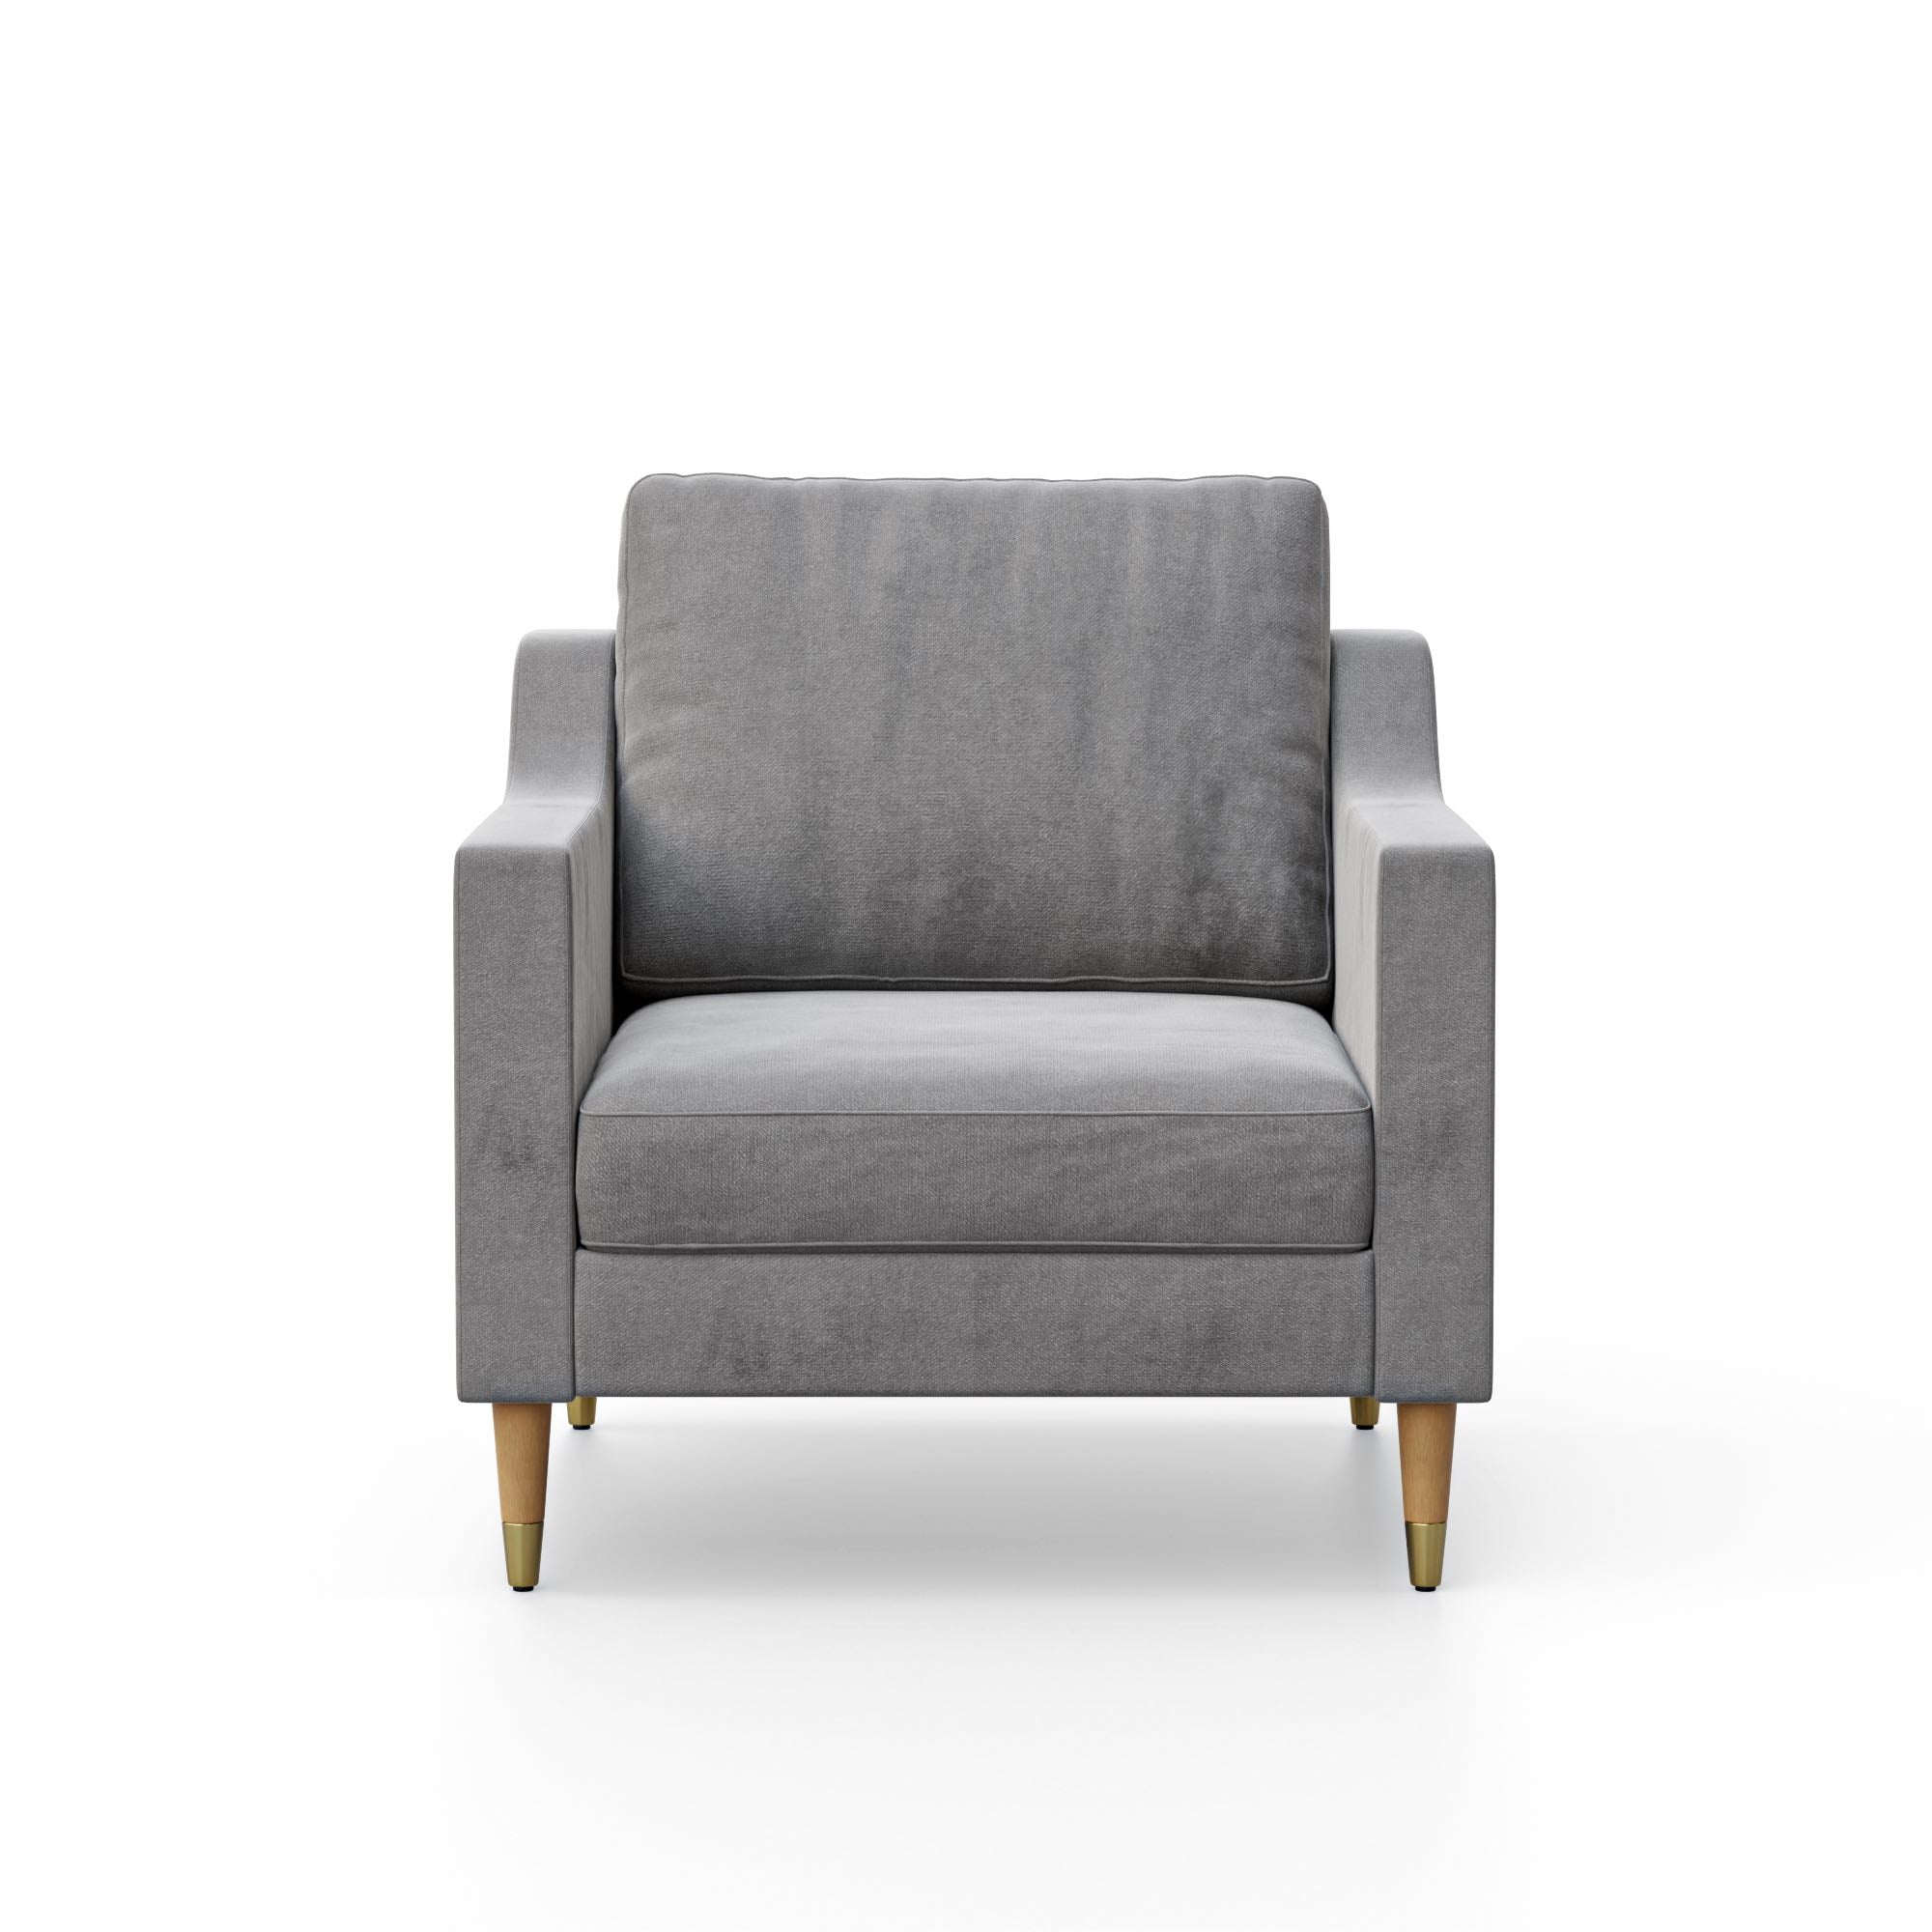 chair-grey-slope